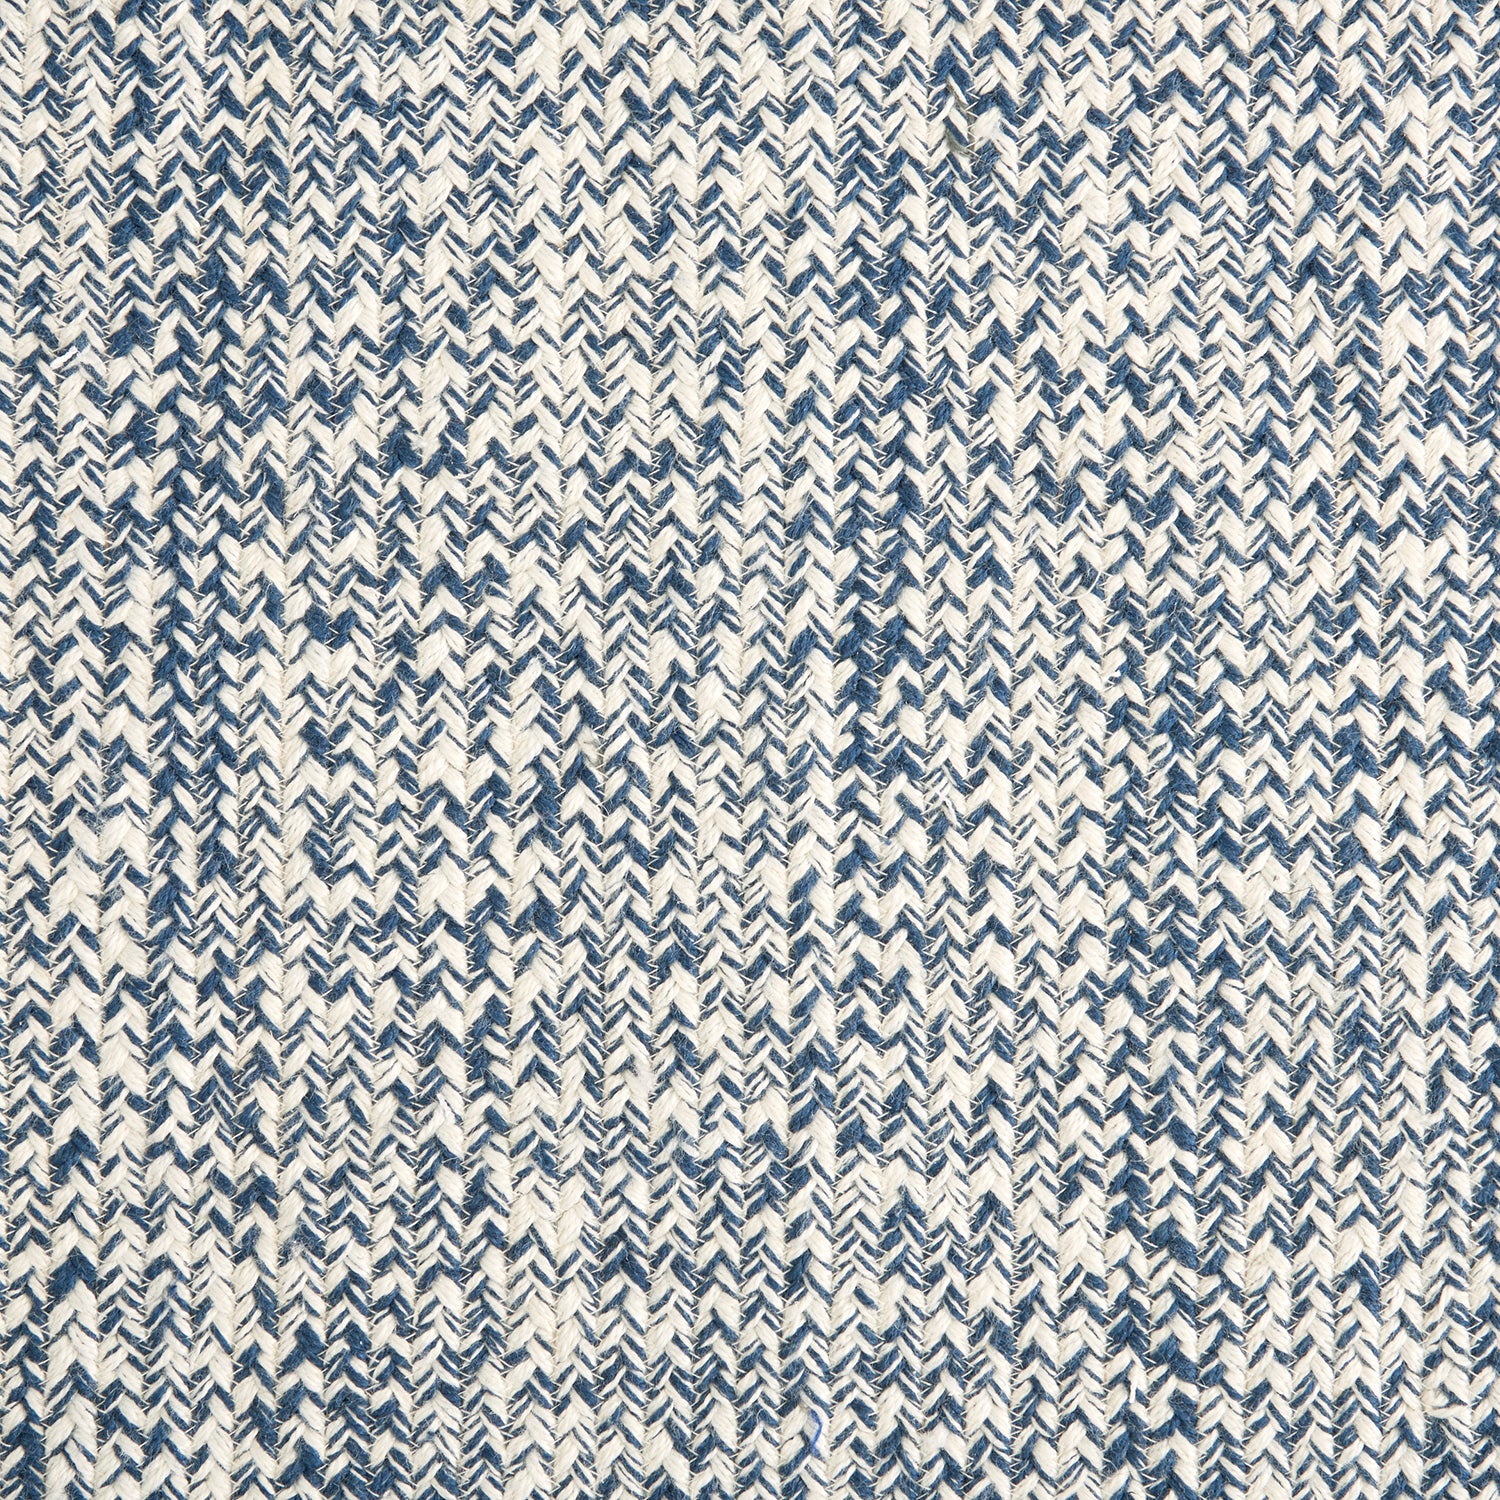 Outdoor broadloom carpet swatch in a chunky ribbed weave in mottled cream and navy.